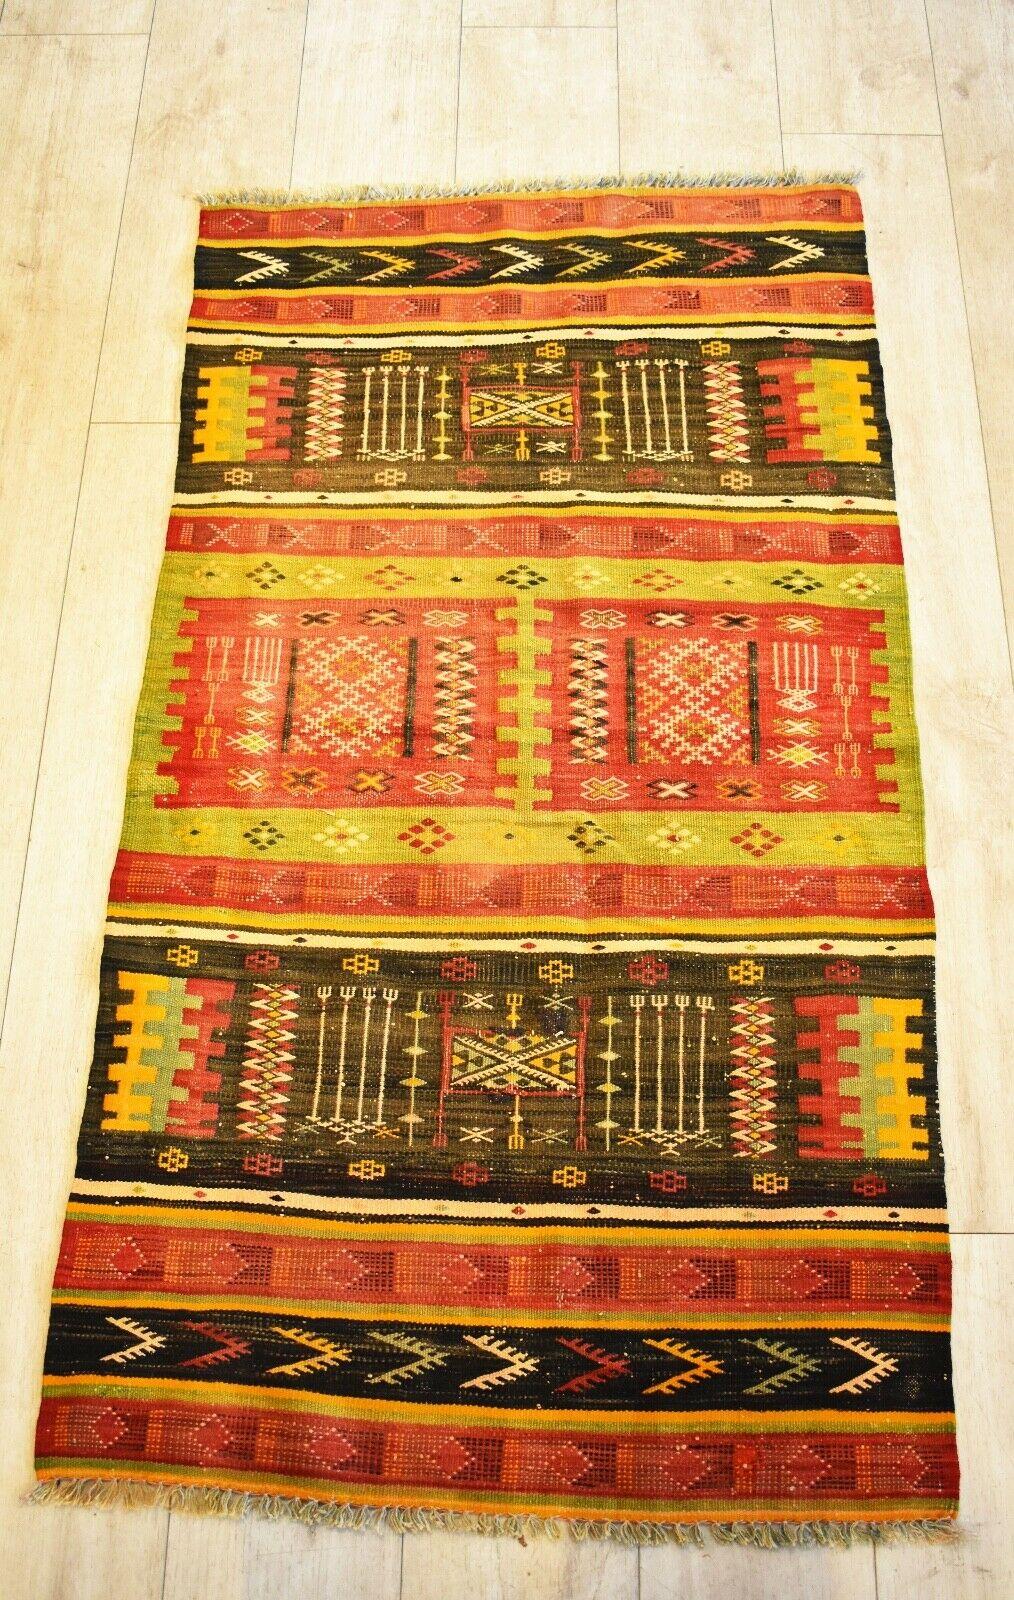 Very rare and unusual beautiful handwoven vintage Kilim runner
with patterns in shades of natural dyed red, black, yellow and green colours.
Handwoven with natural dyes.
Has a lovely aged patina & nice quality.